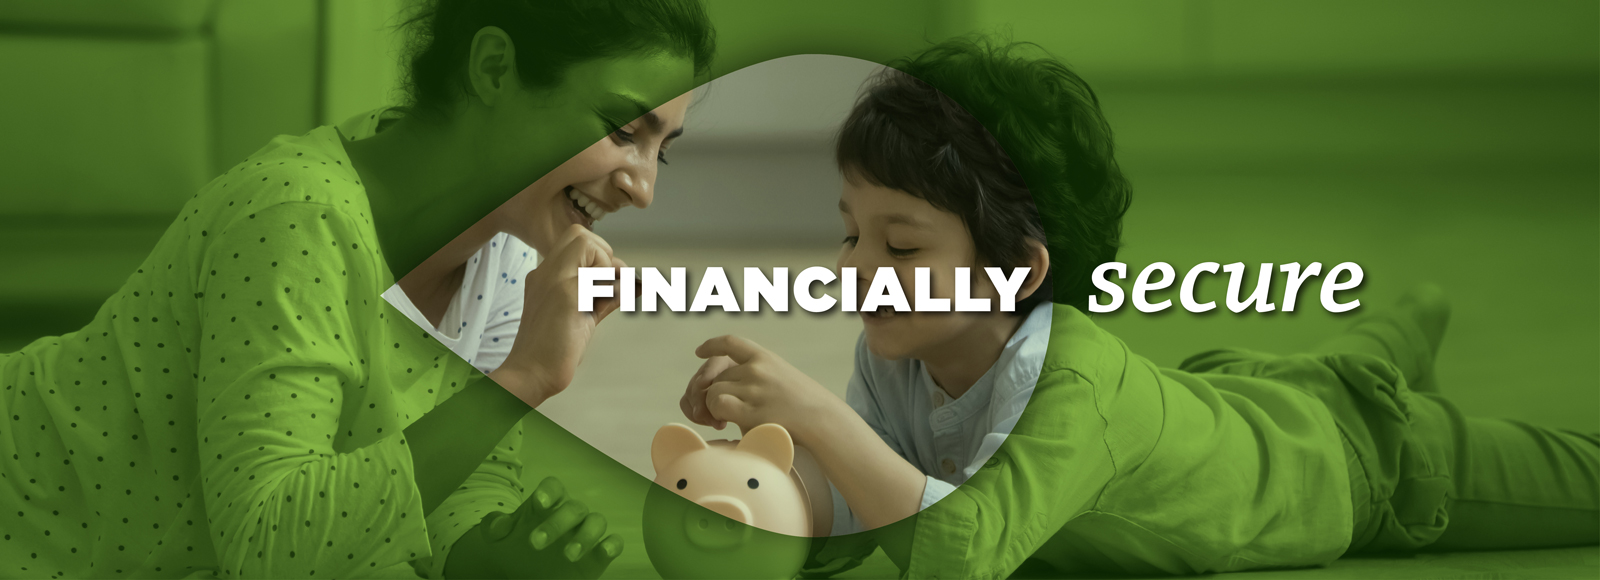 Click here to visit the financially secure CAN page